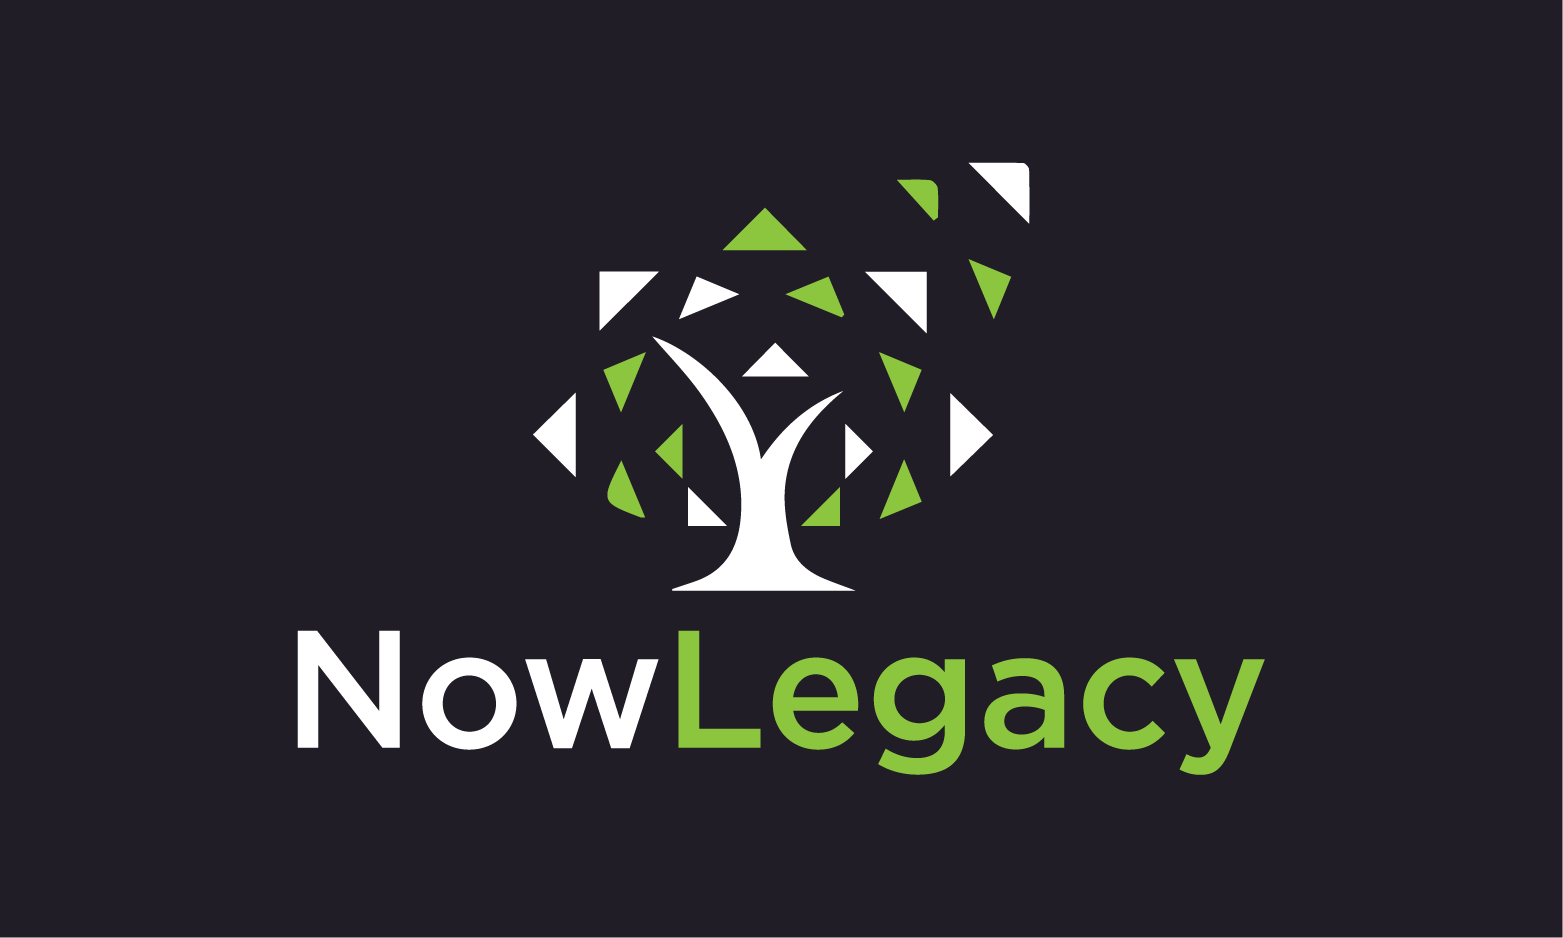 NowLegacy.com - Creative brandable domain for sale